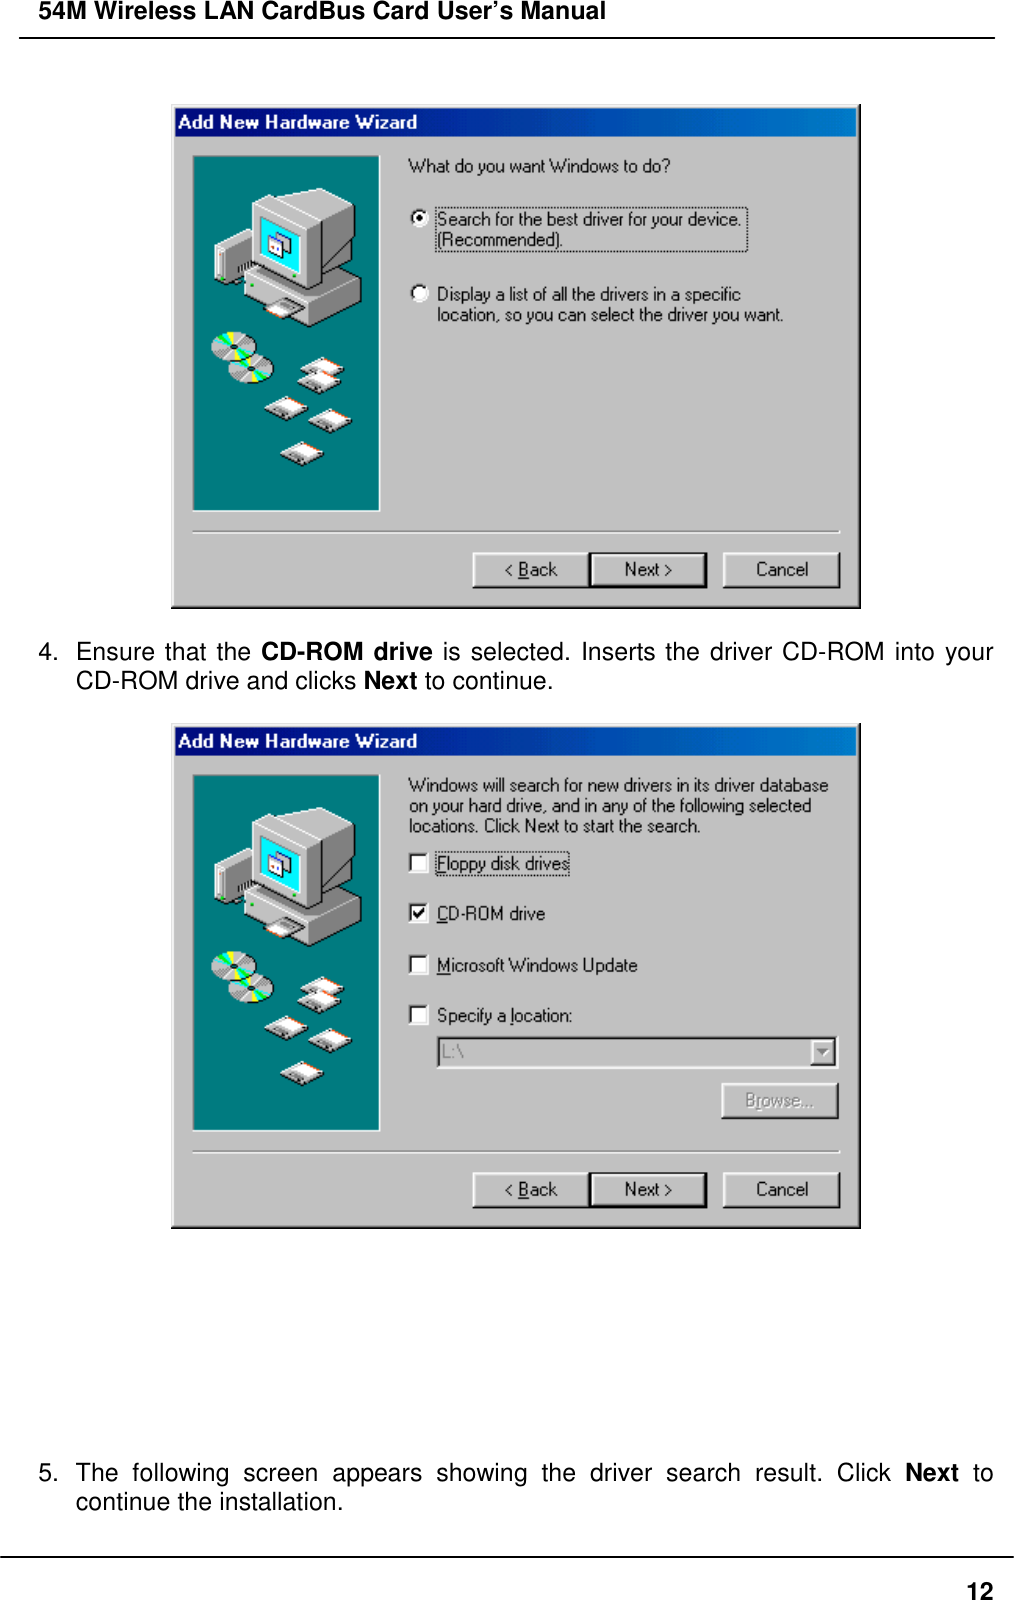 54M Wireless LAN CardBus Card User’s Manual124. Ensure that the CD-ROM drive is selected. Inserts the driver CD-ROM into yourCD-ROM drive and clicks Next to continue.5. The following screen appears showing the driver search result. Click Next tocontinue the installation.